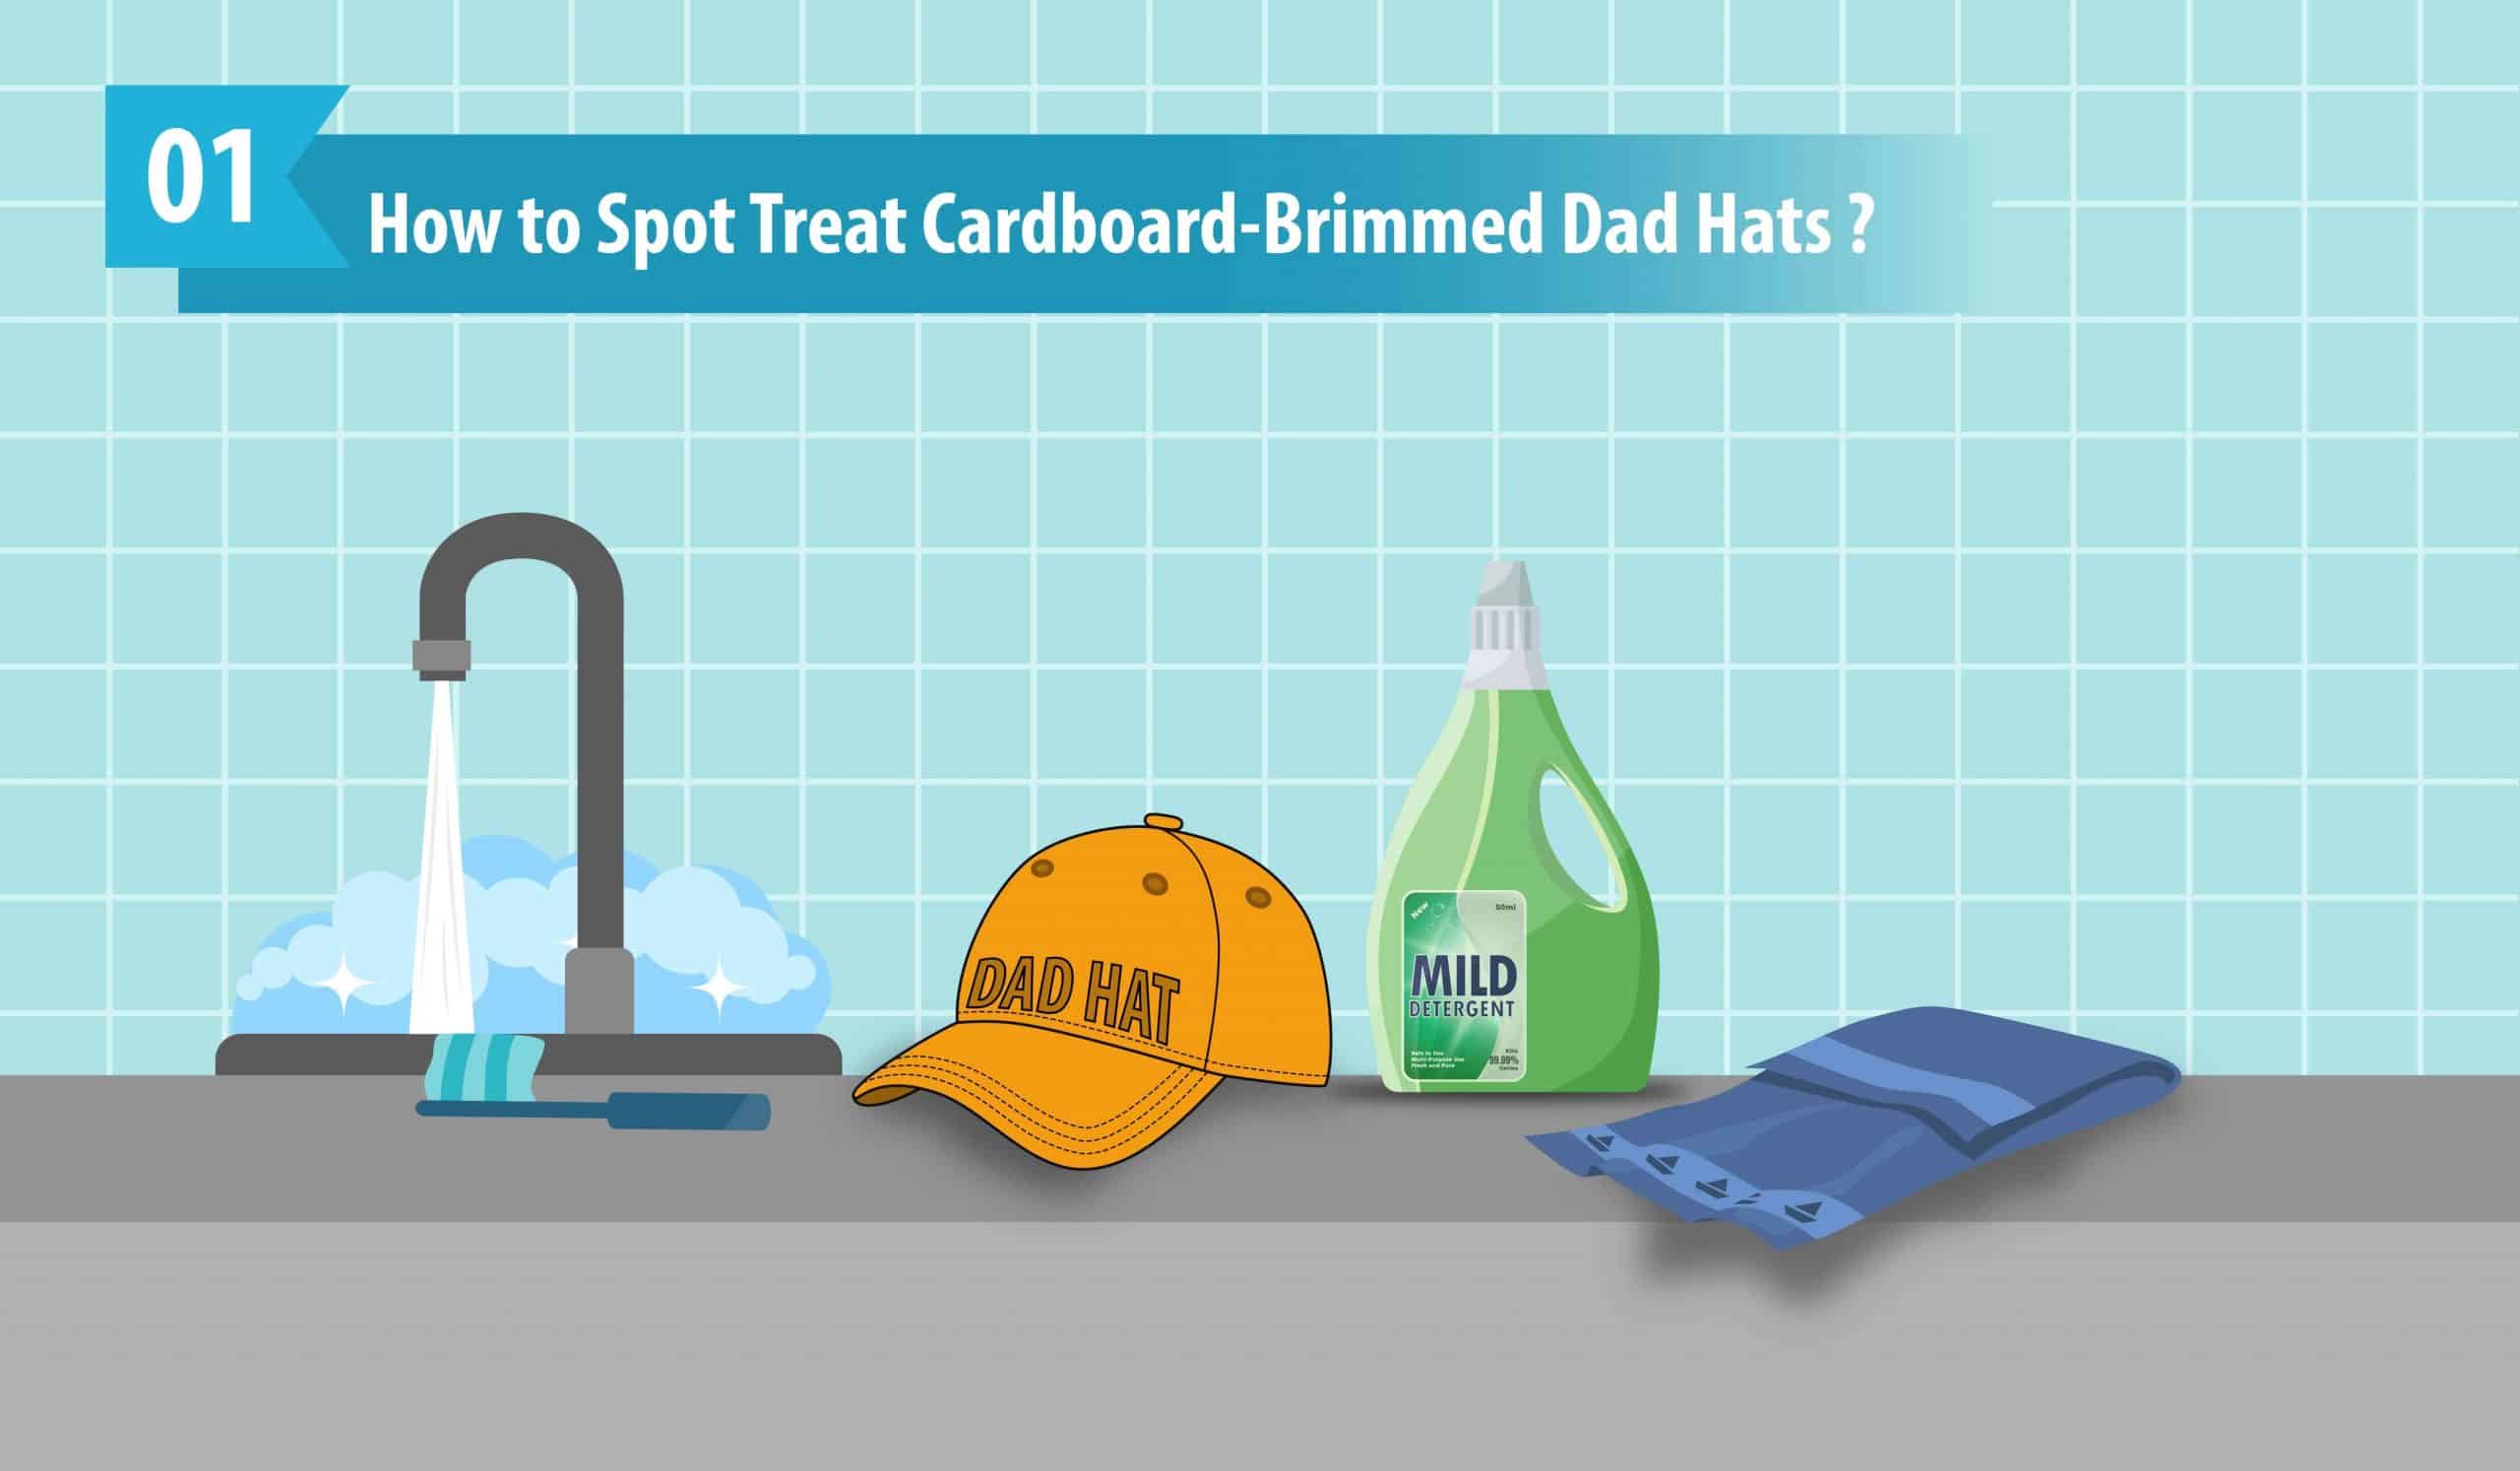 How to Spot Treat Cardboard-Brimmed Dad Hats